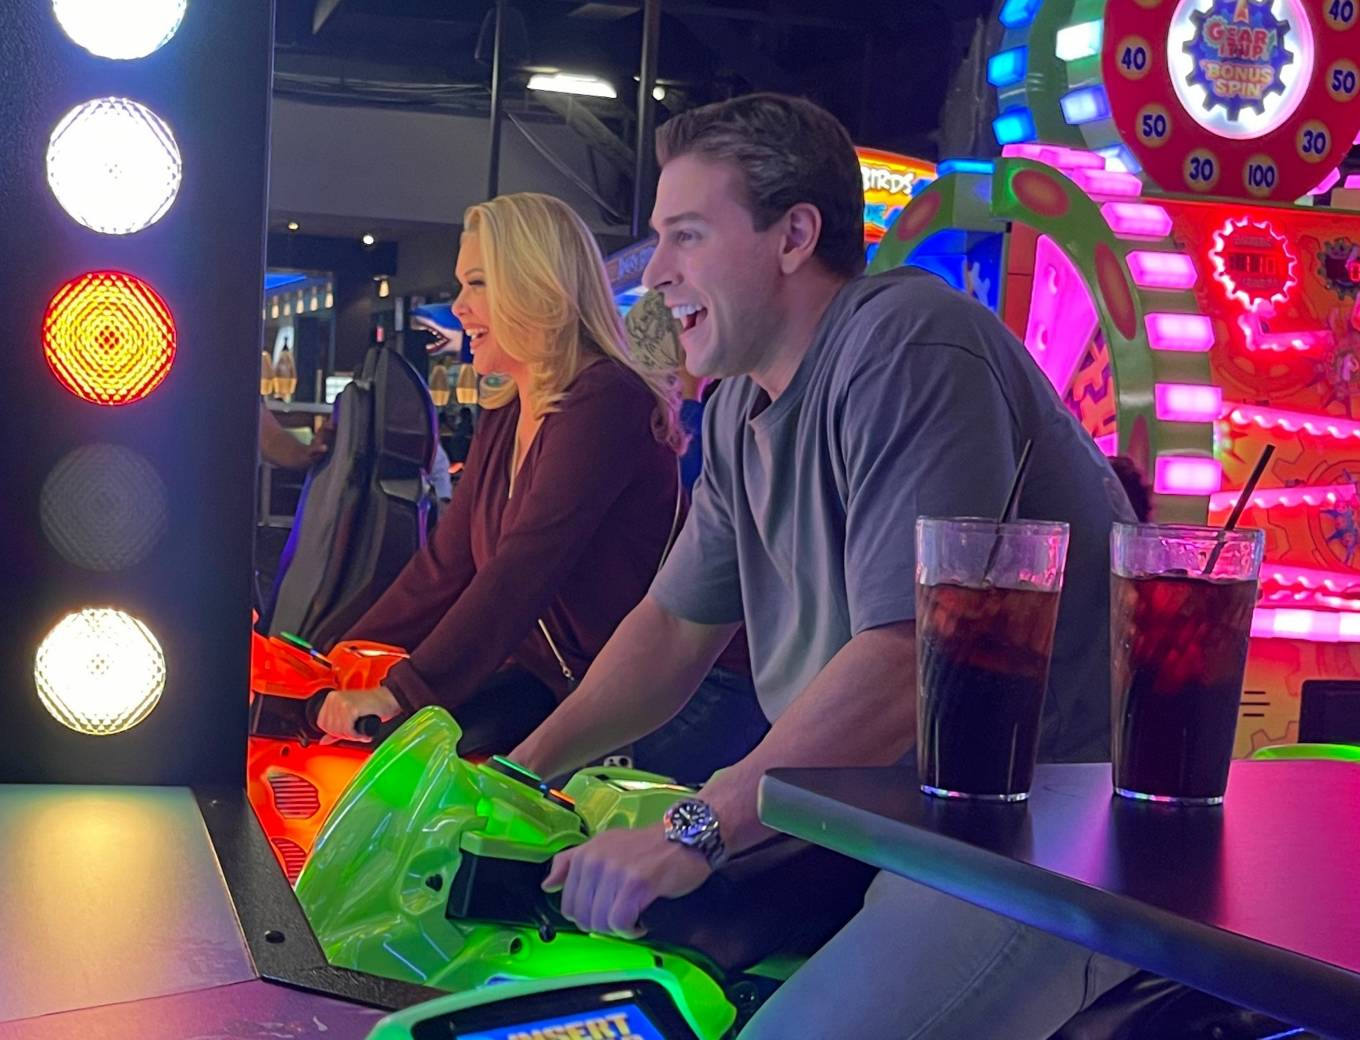 Shanna Moakler - With boyfriend Matthew Rondeau at Dave and Busters in Los Angeles